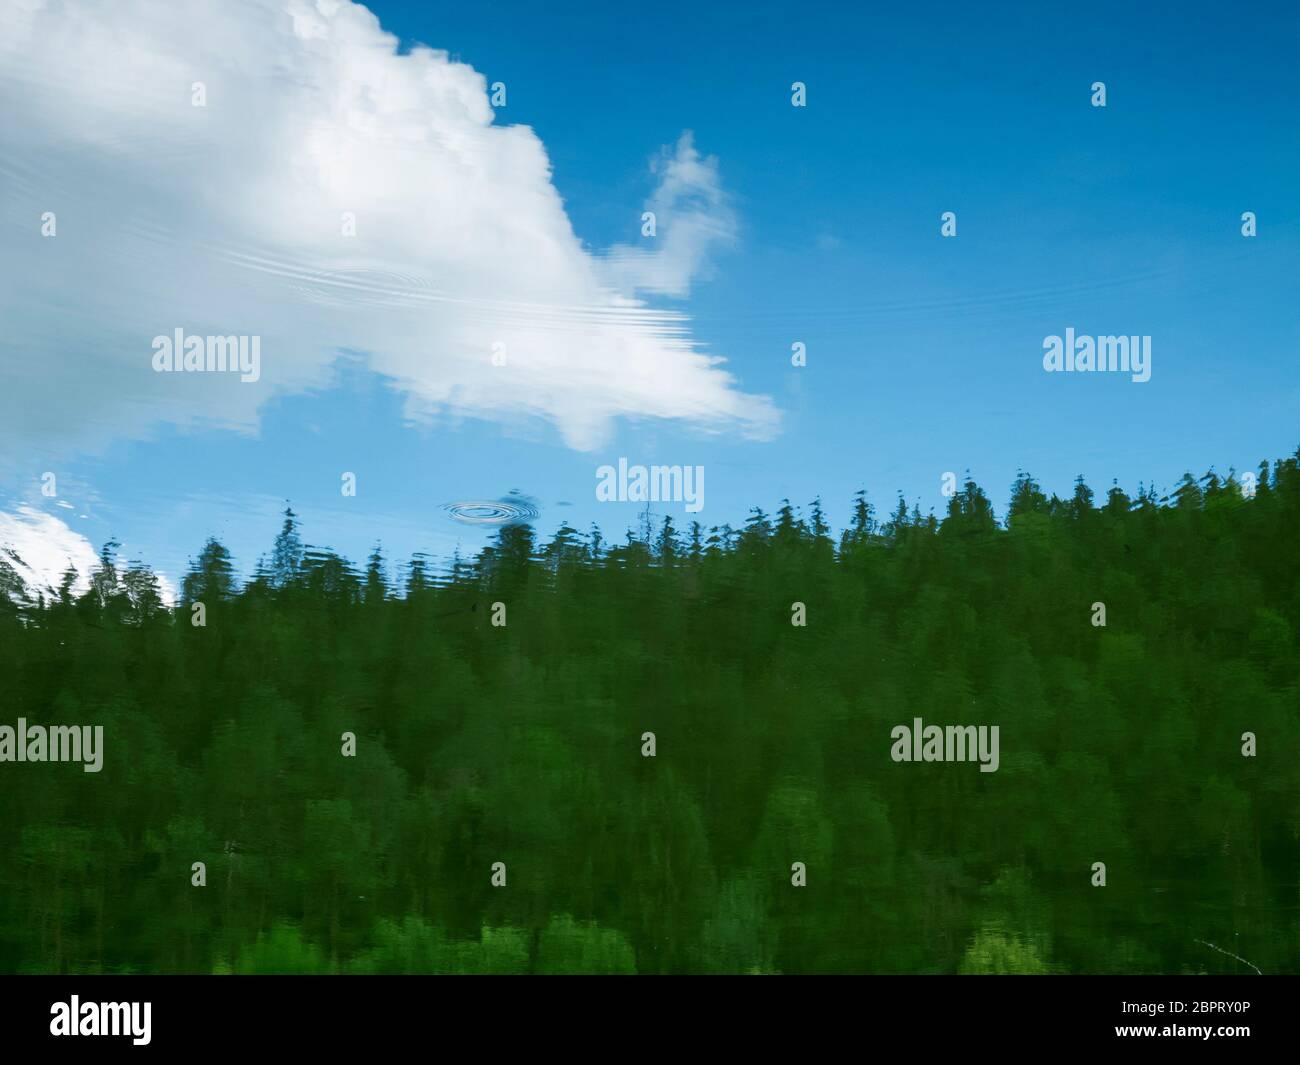 Water surface with reflection of a forest and blue sky with white cloud. Stock Photo